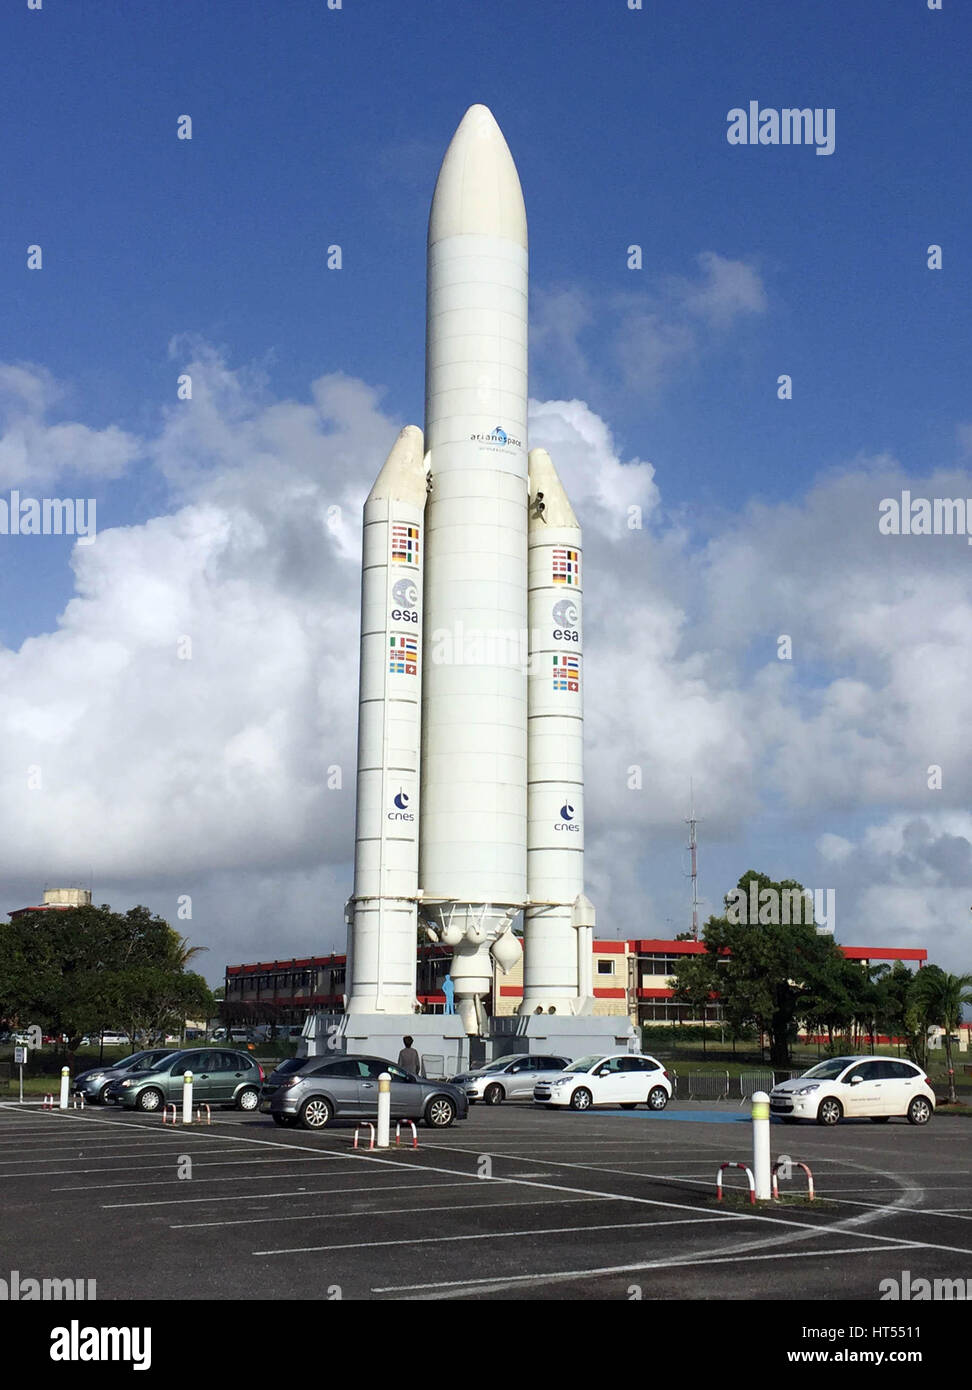 Life size model of an Ariane heavy lift rocket at the European spaceport at Kourou, French Guiana. Stock Photo